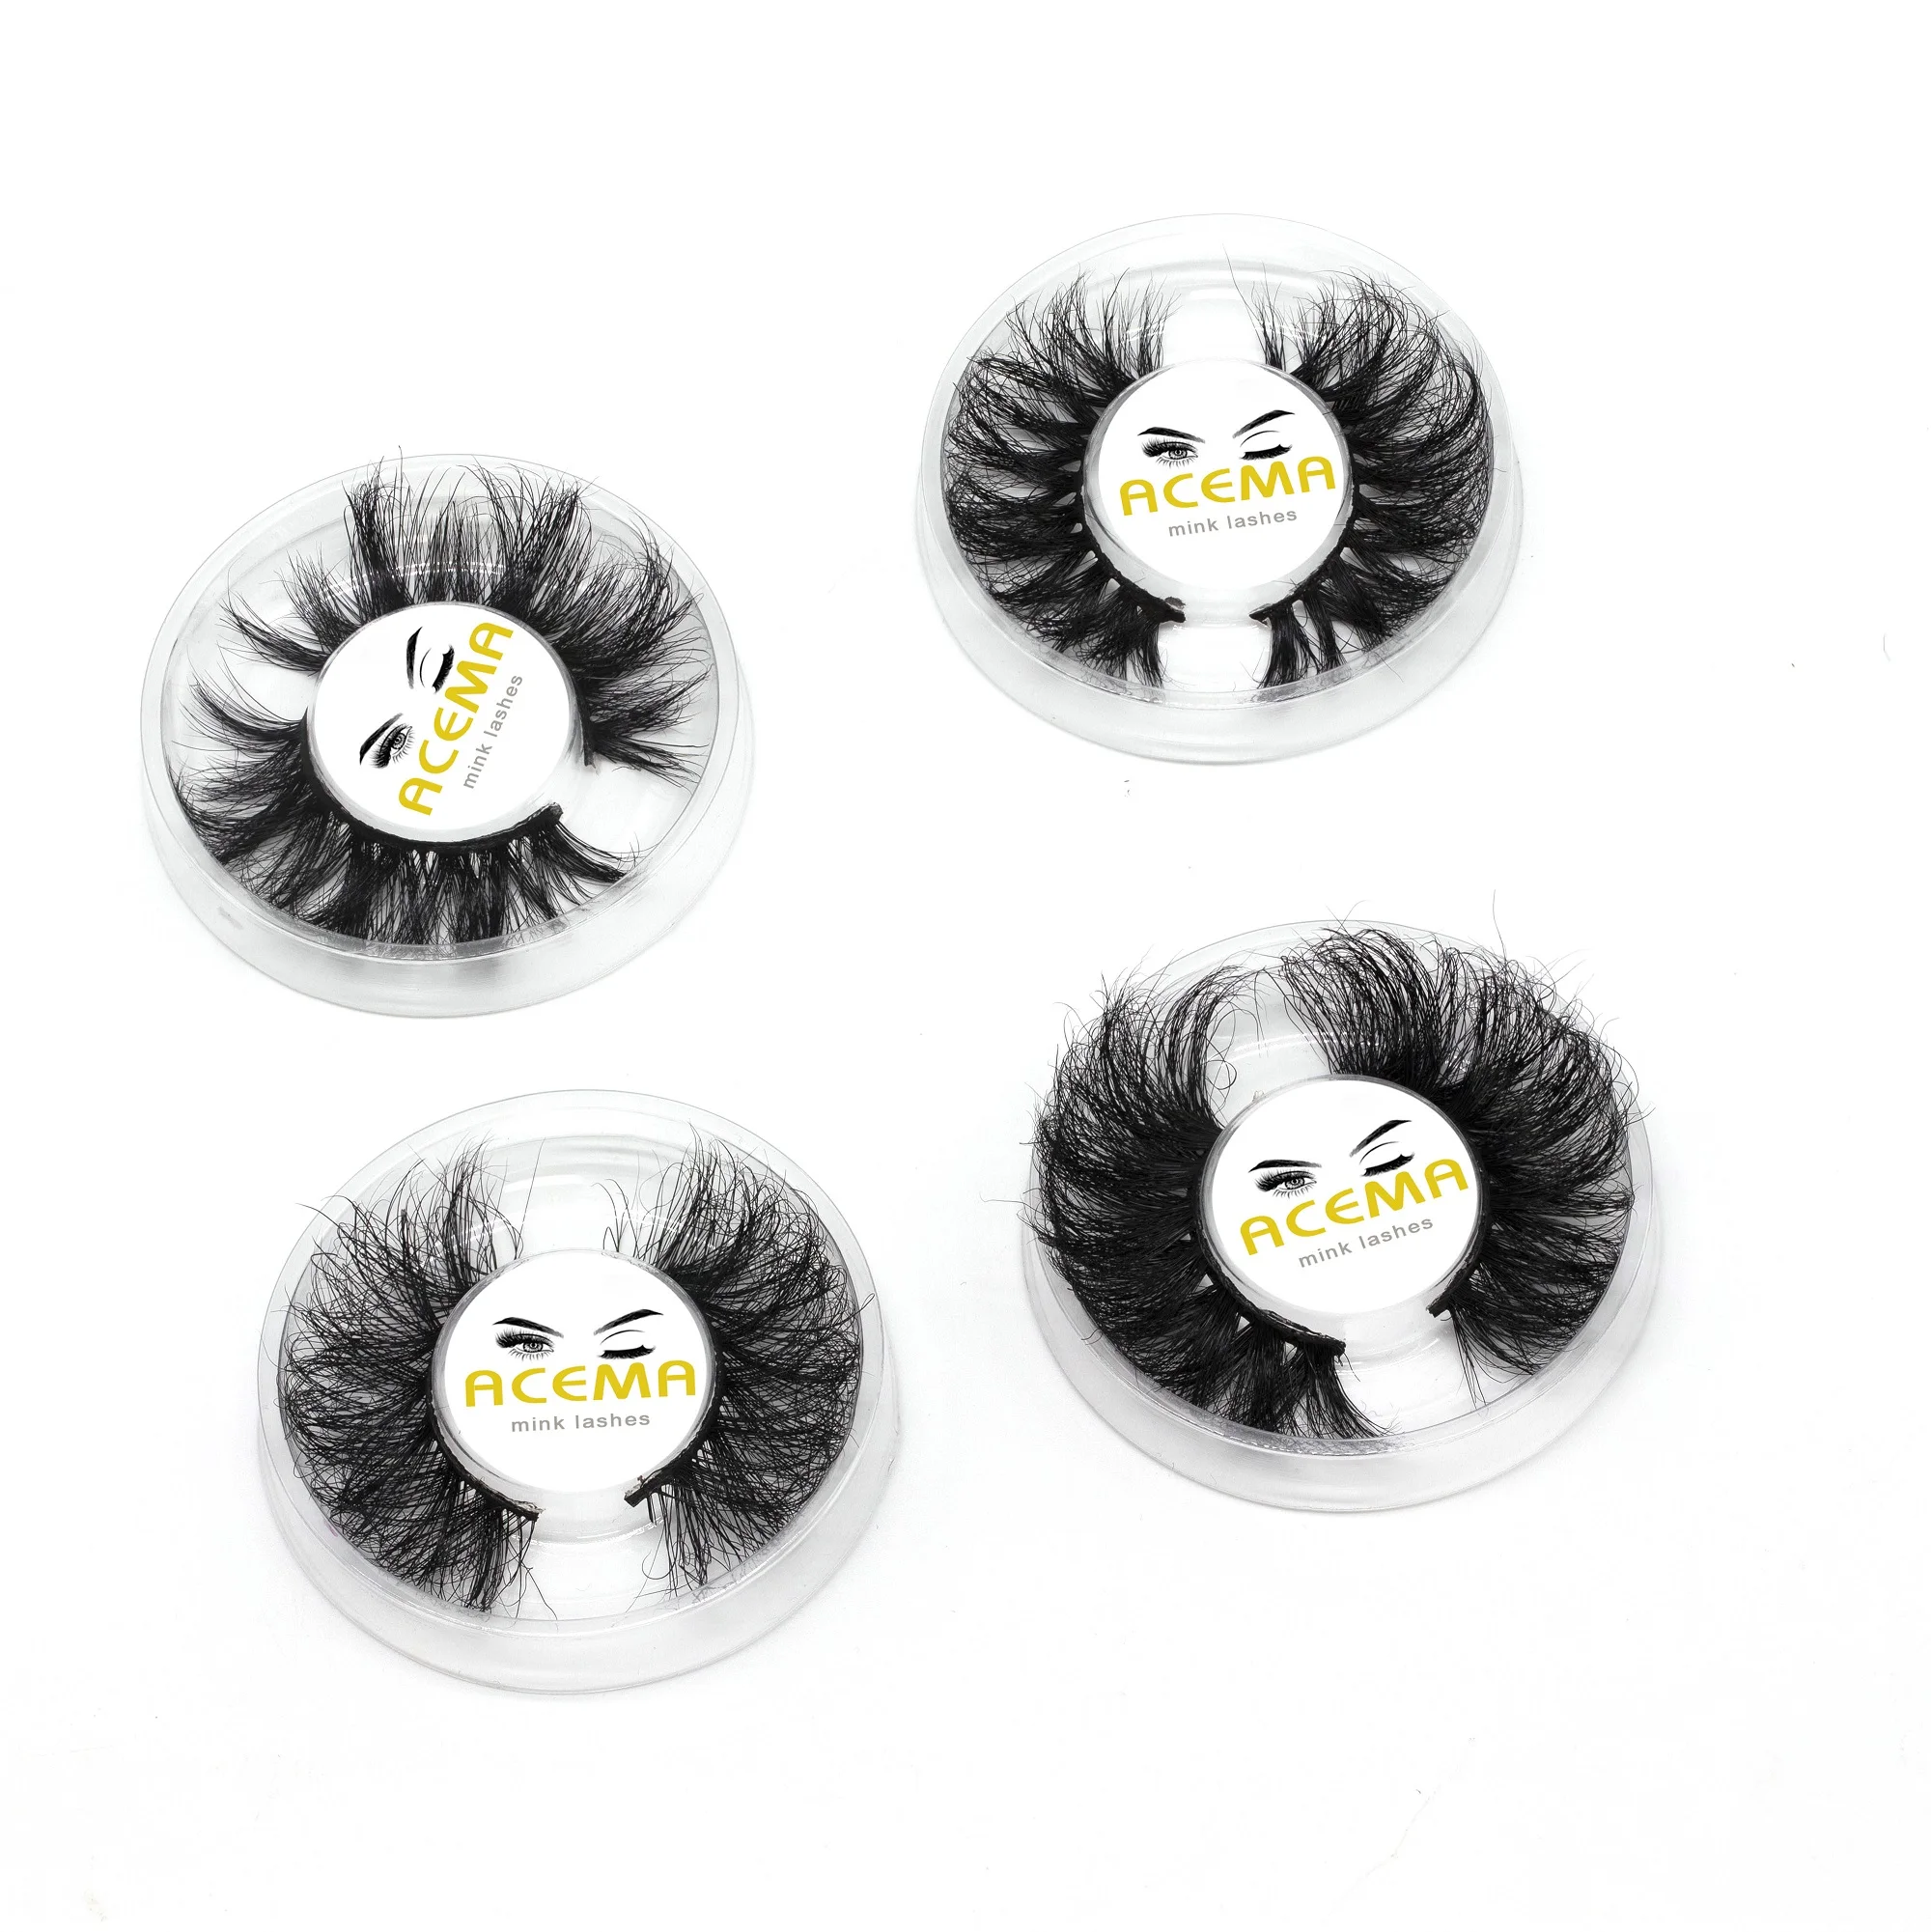 

2021 Wholesale lashes Vendor dramatic fluffy 25mm false 3D real siberian mink full strip eyelashes with customized packaging box, Natural black